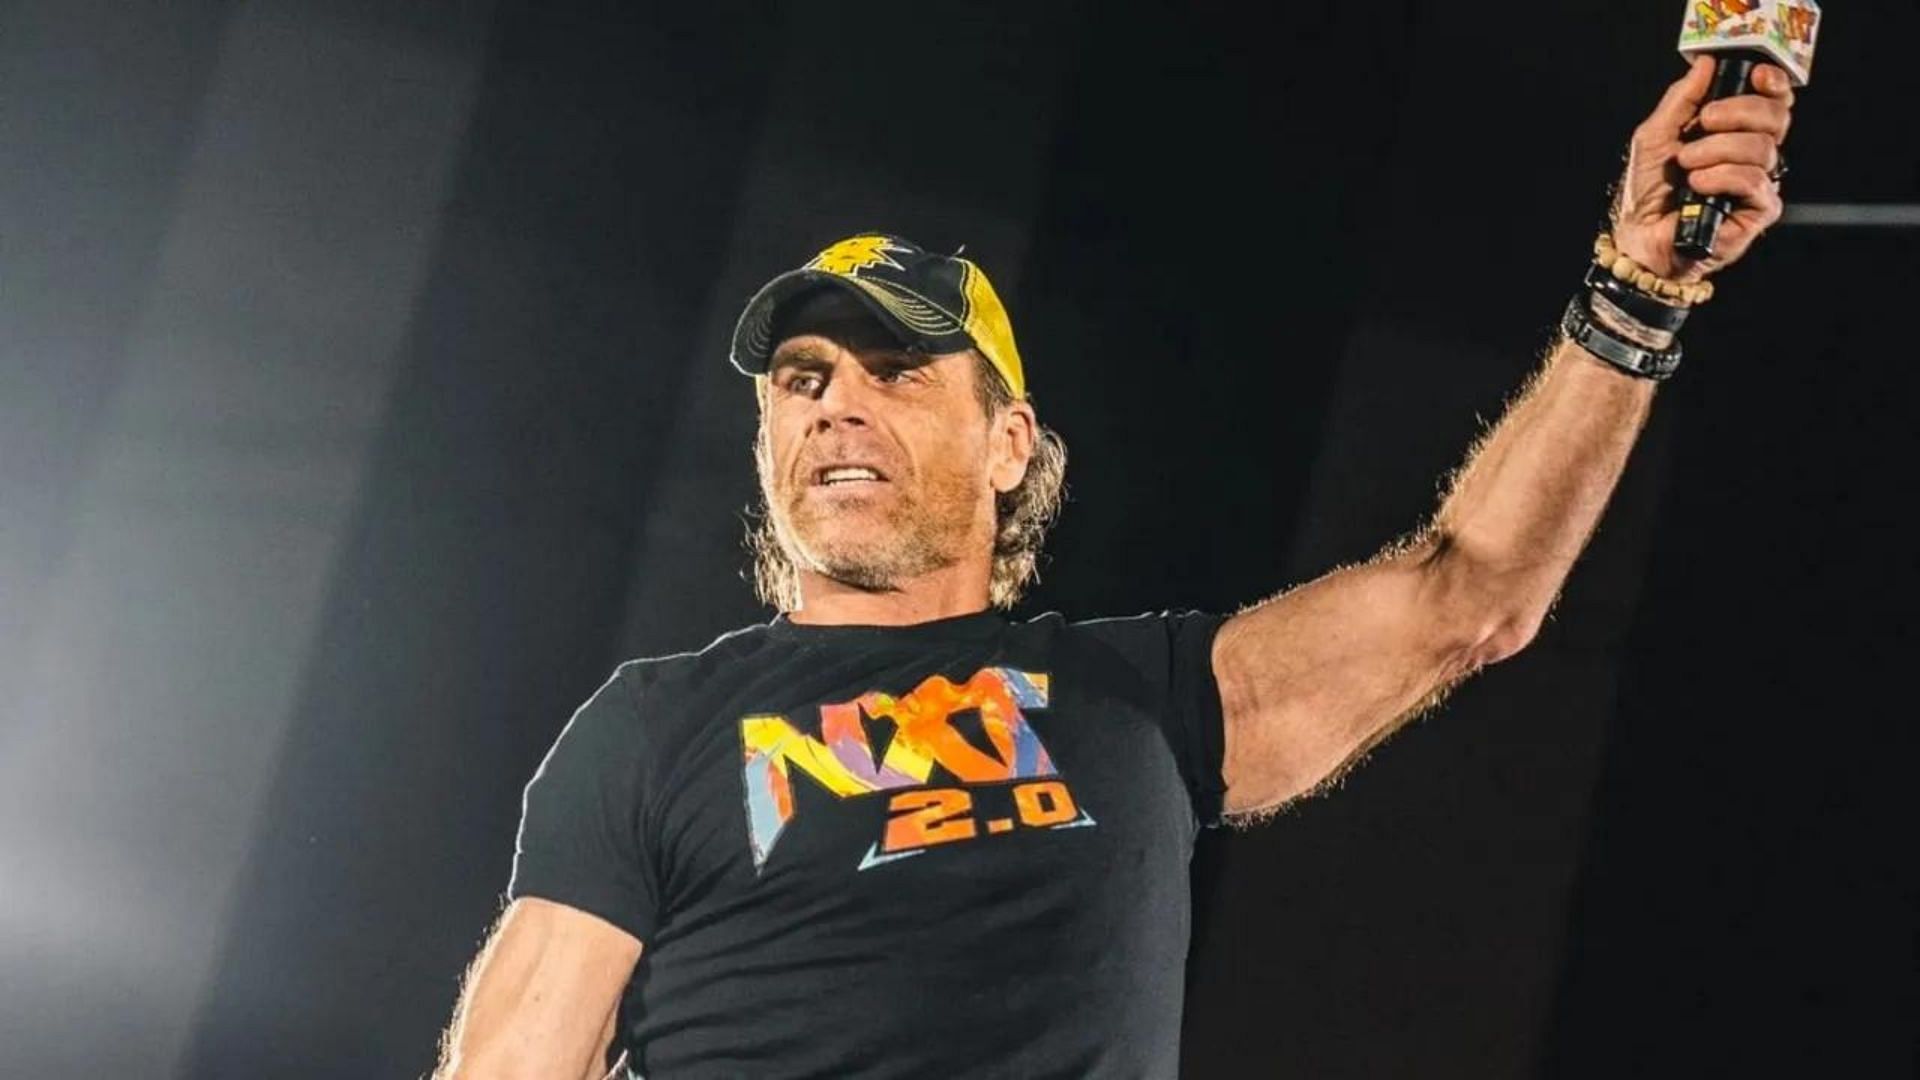 Shawn Michaels is a WWE Hall of Famer